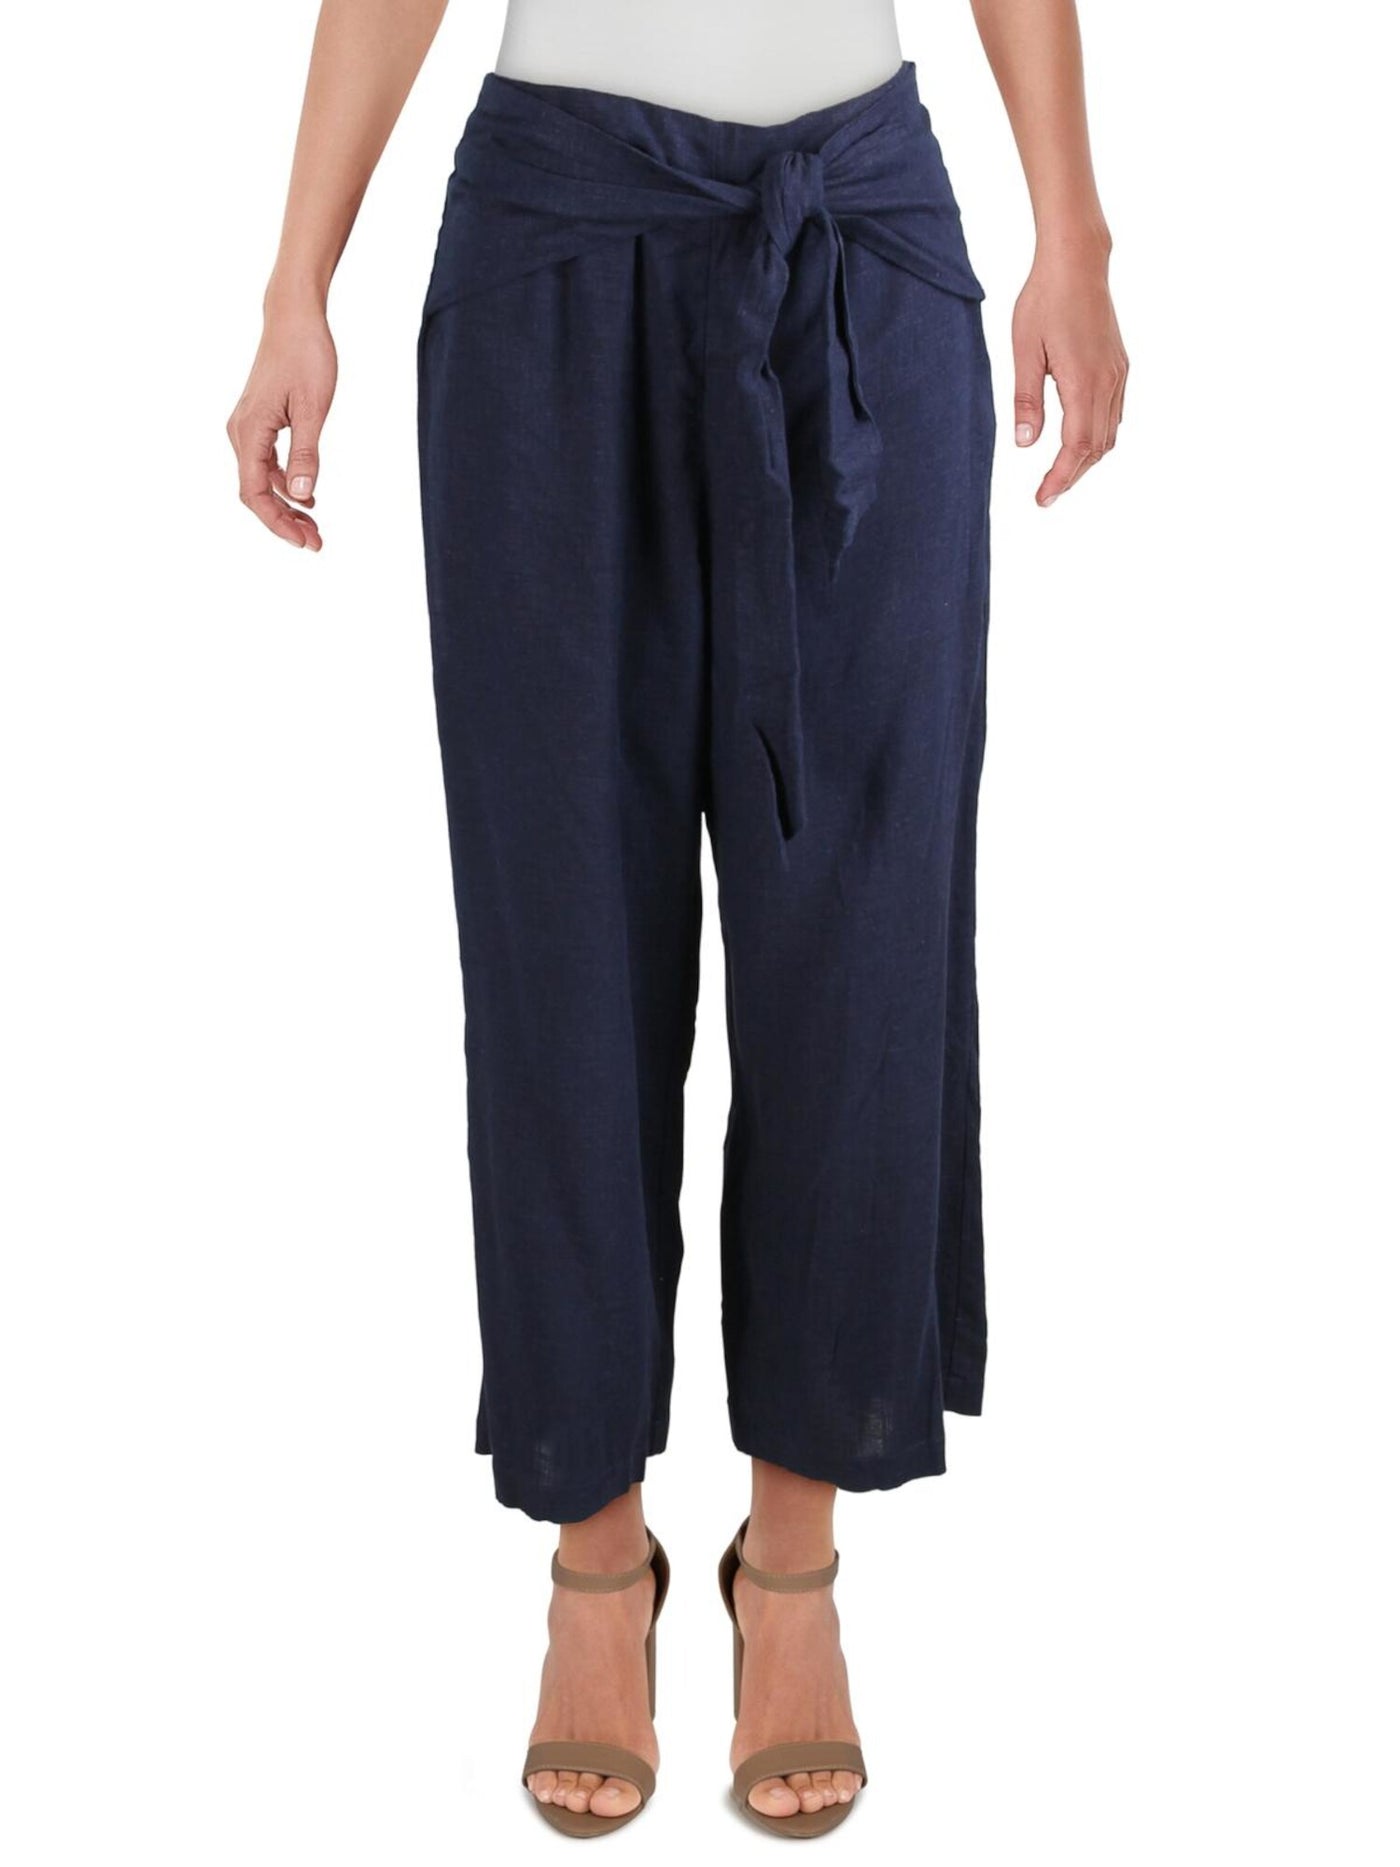 FASHION ON EARTH Womens Navy Tie Waist Cropped Pants Size: L